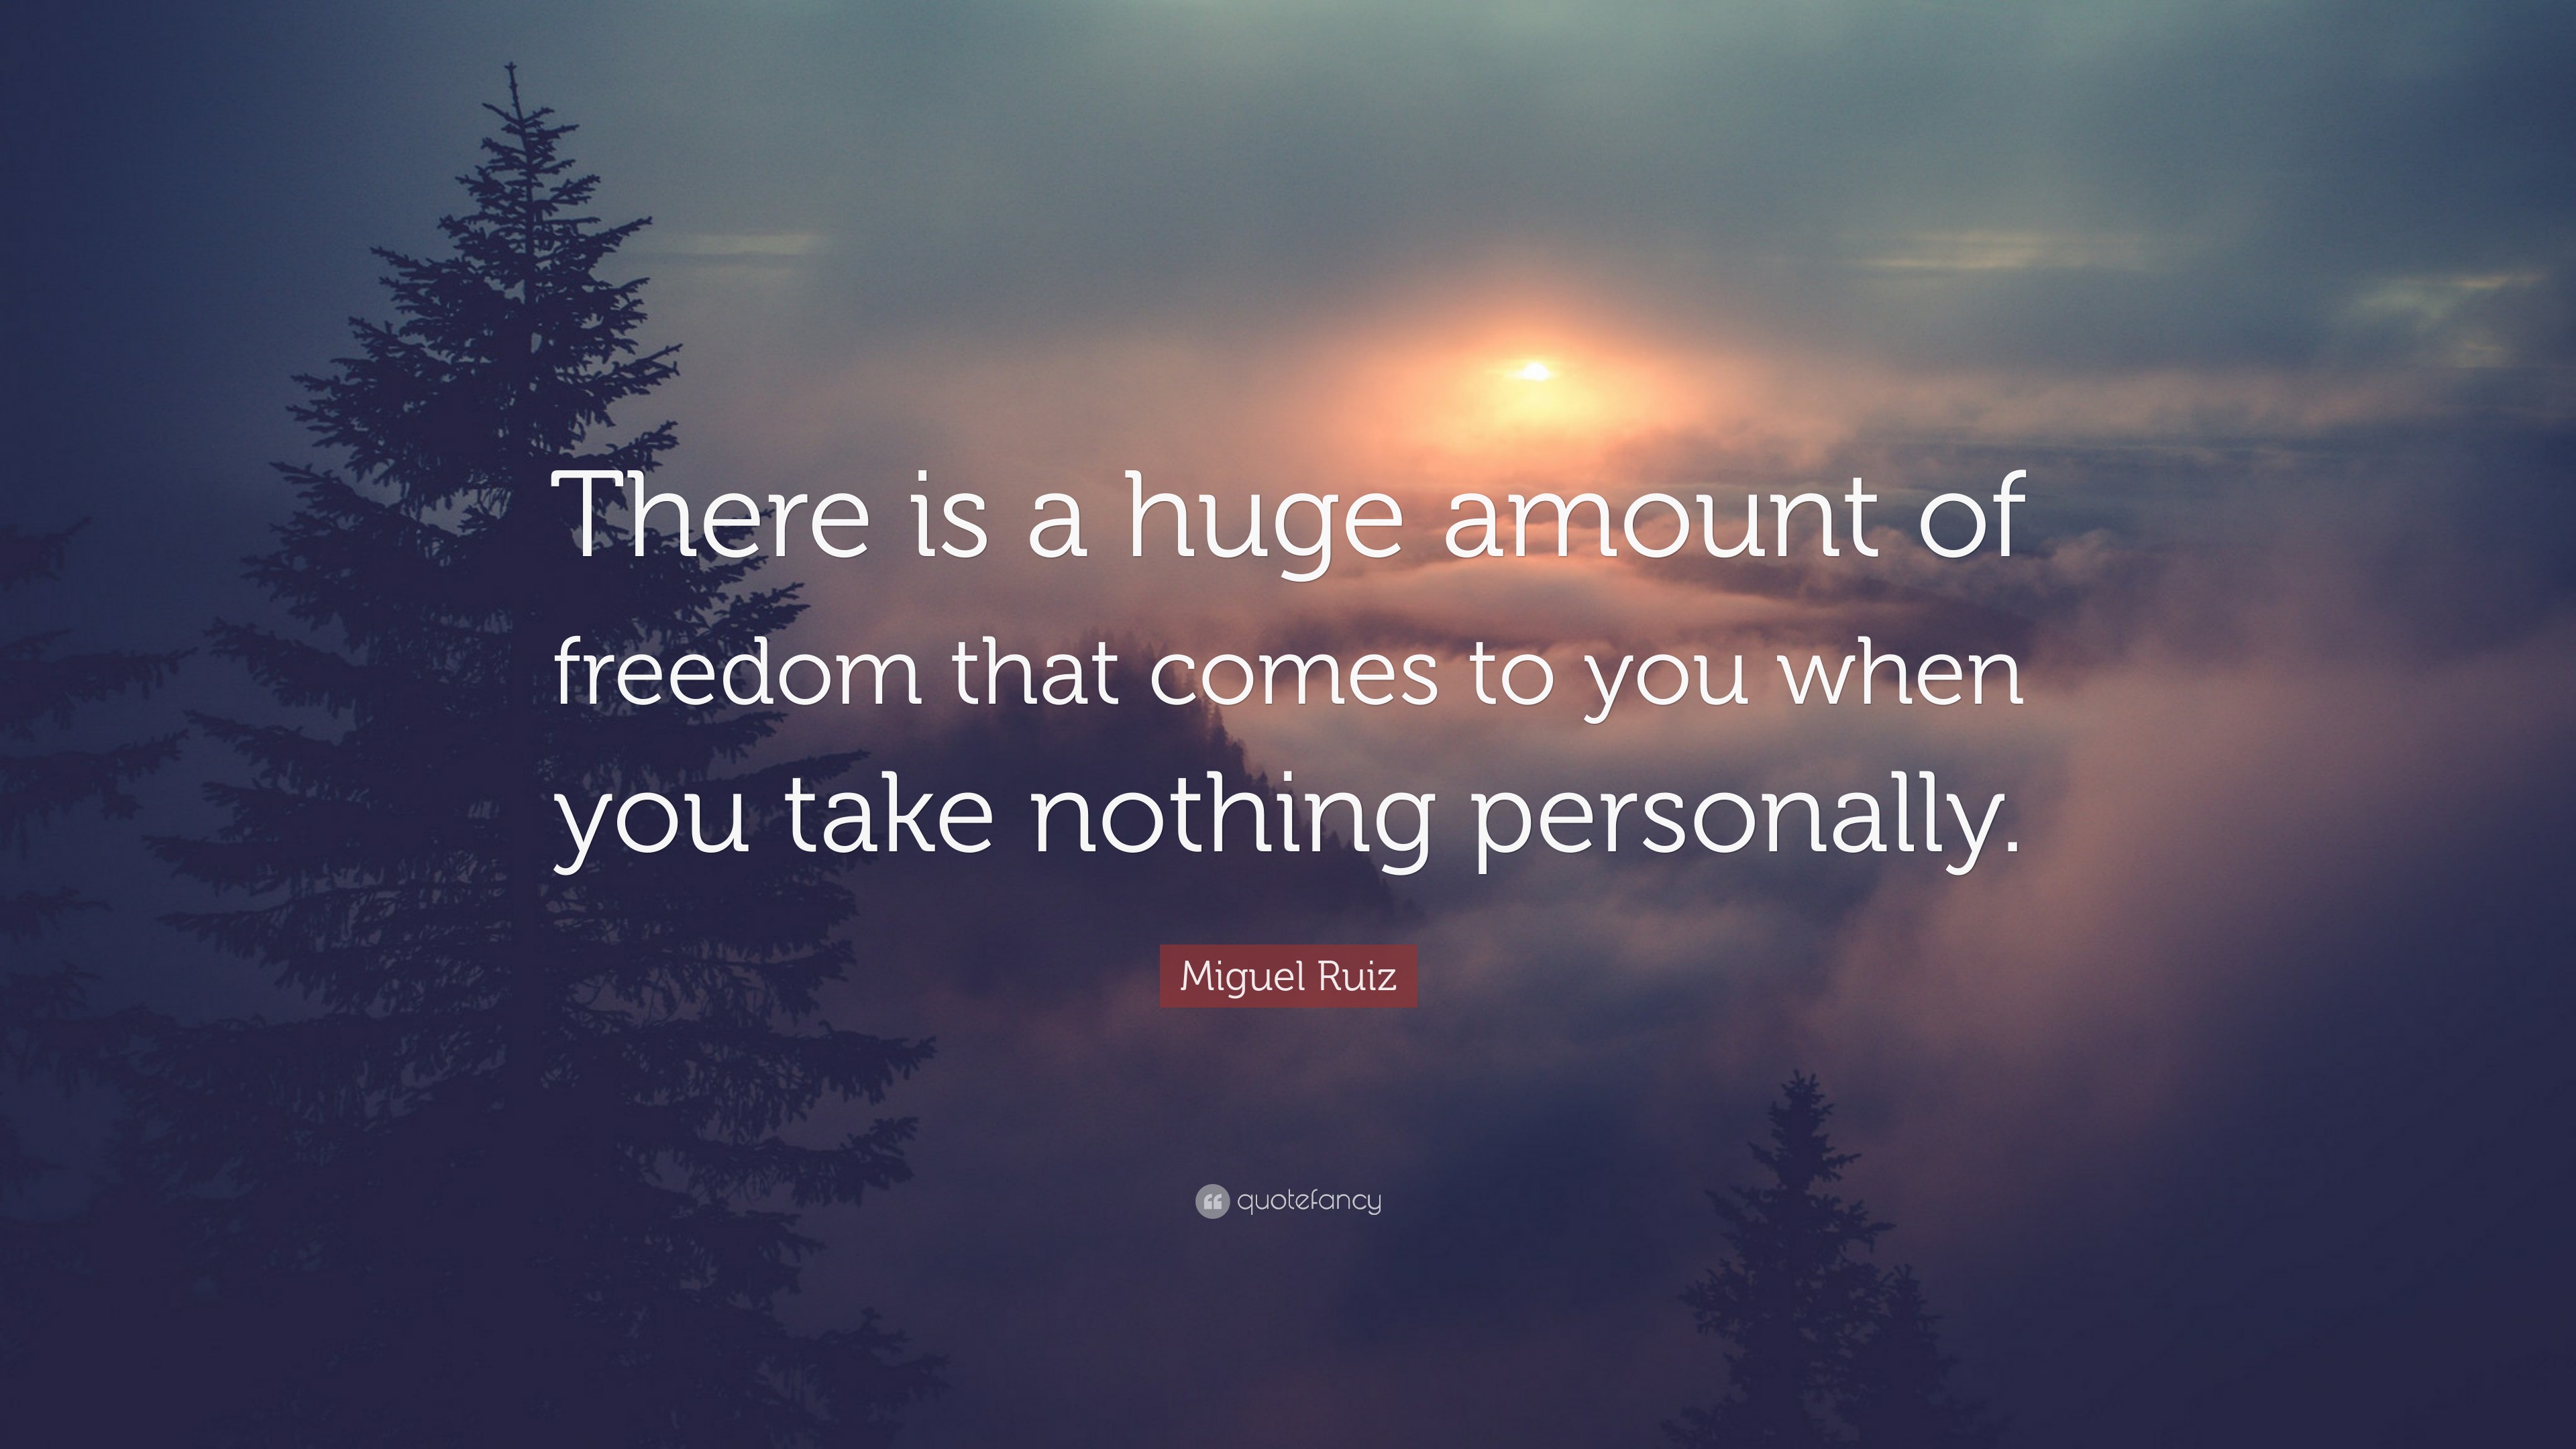 Miguel Ruiz Quote There Is A Huge Amount Of Freedom That Comes To You When You